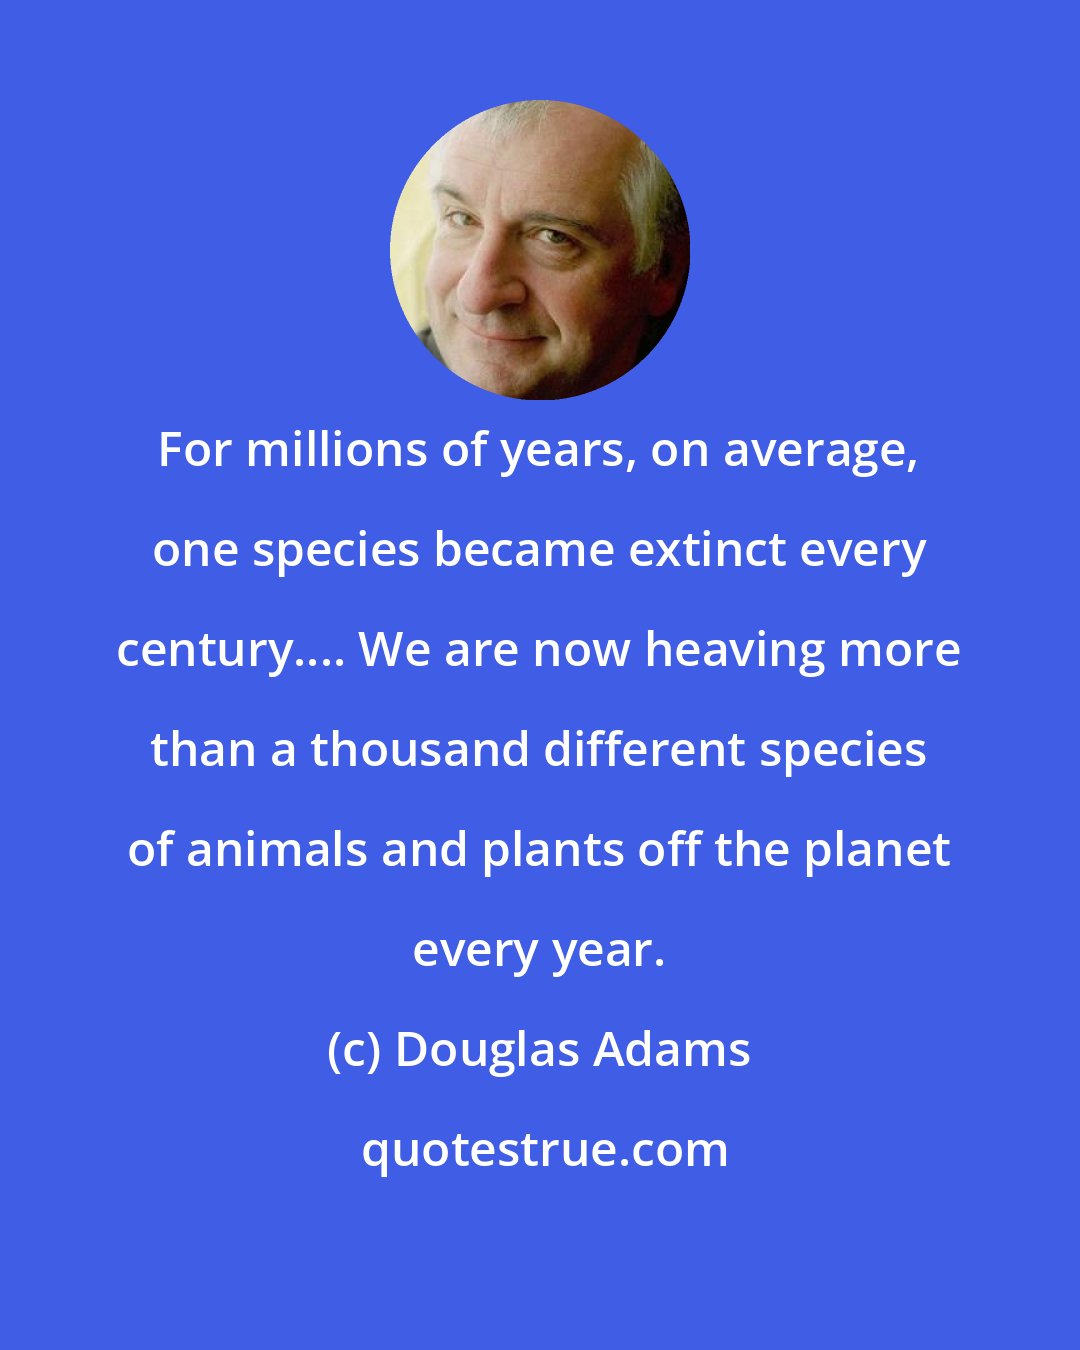 Douglas Adams: For millions of years, on average, one species became extinct every century.... We are now heaving more than a thousand different species of animals and plants off the planet every year.